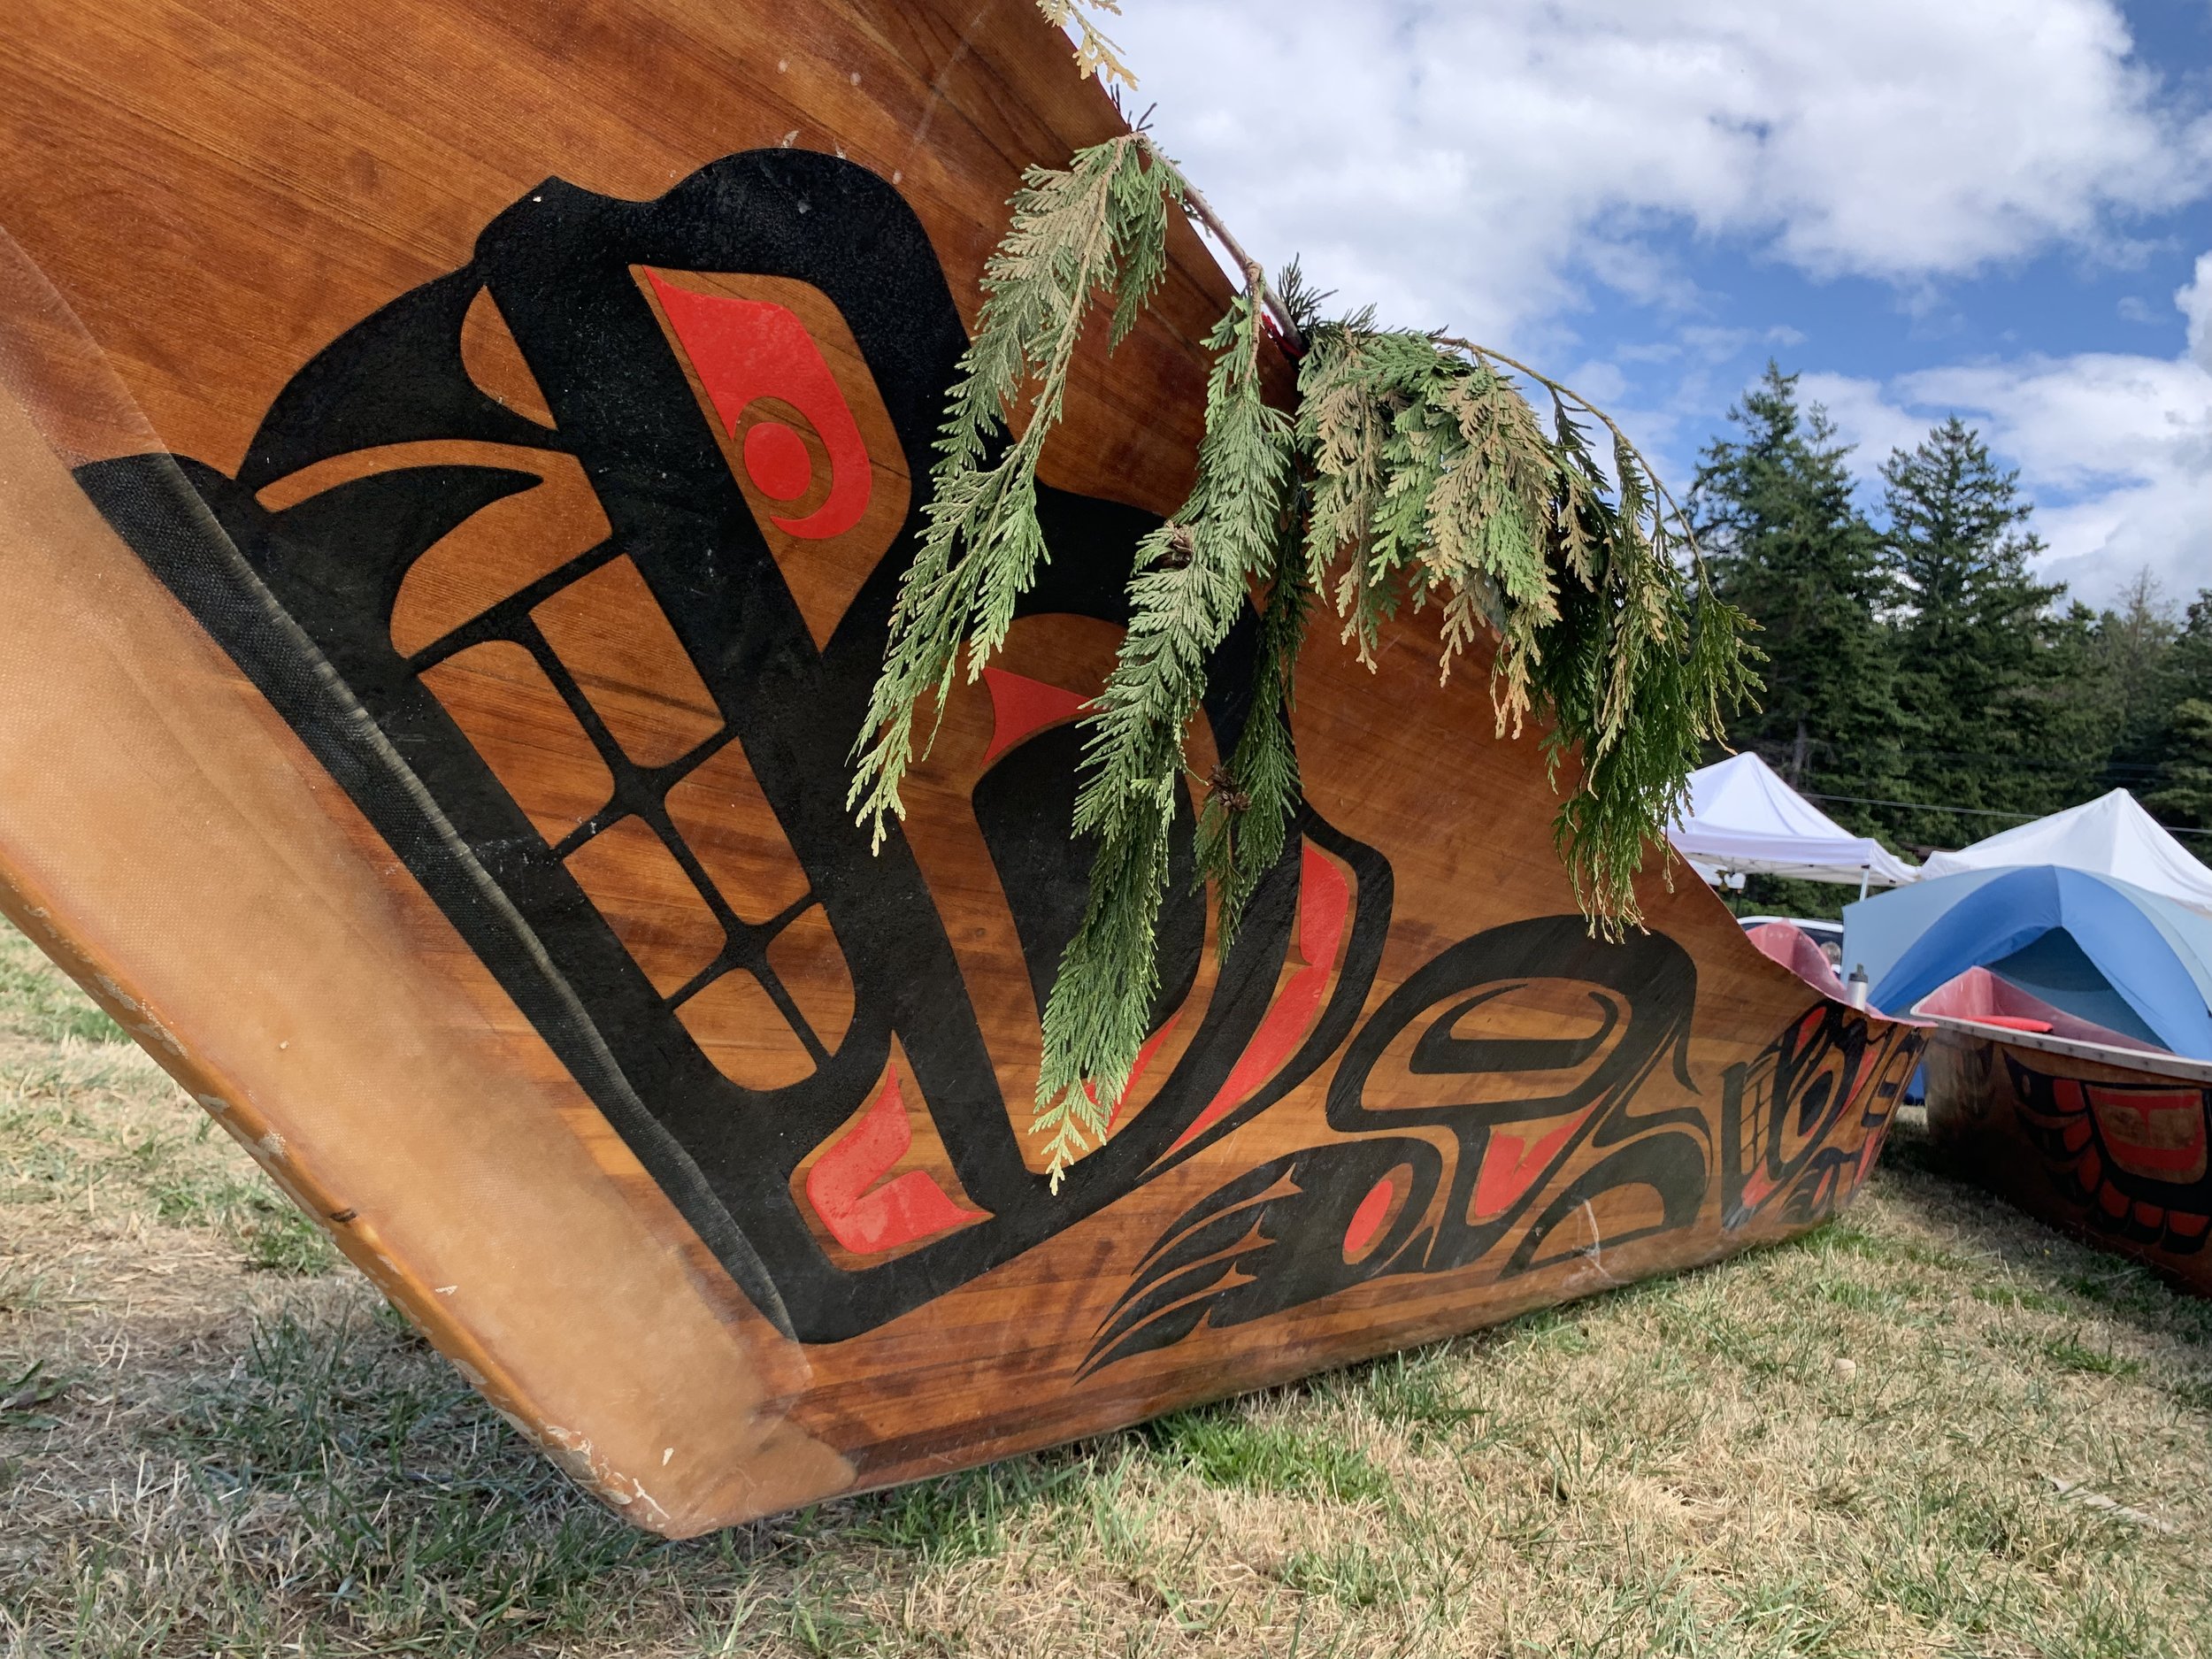 One of nearly 100 canoes paddle to Lummi Nation for the the 2019 Paddle to Lummi. Photo by Aaron Straight.